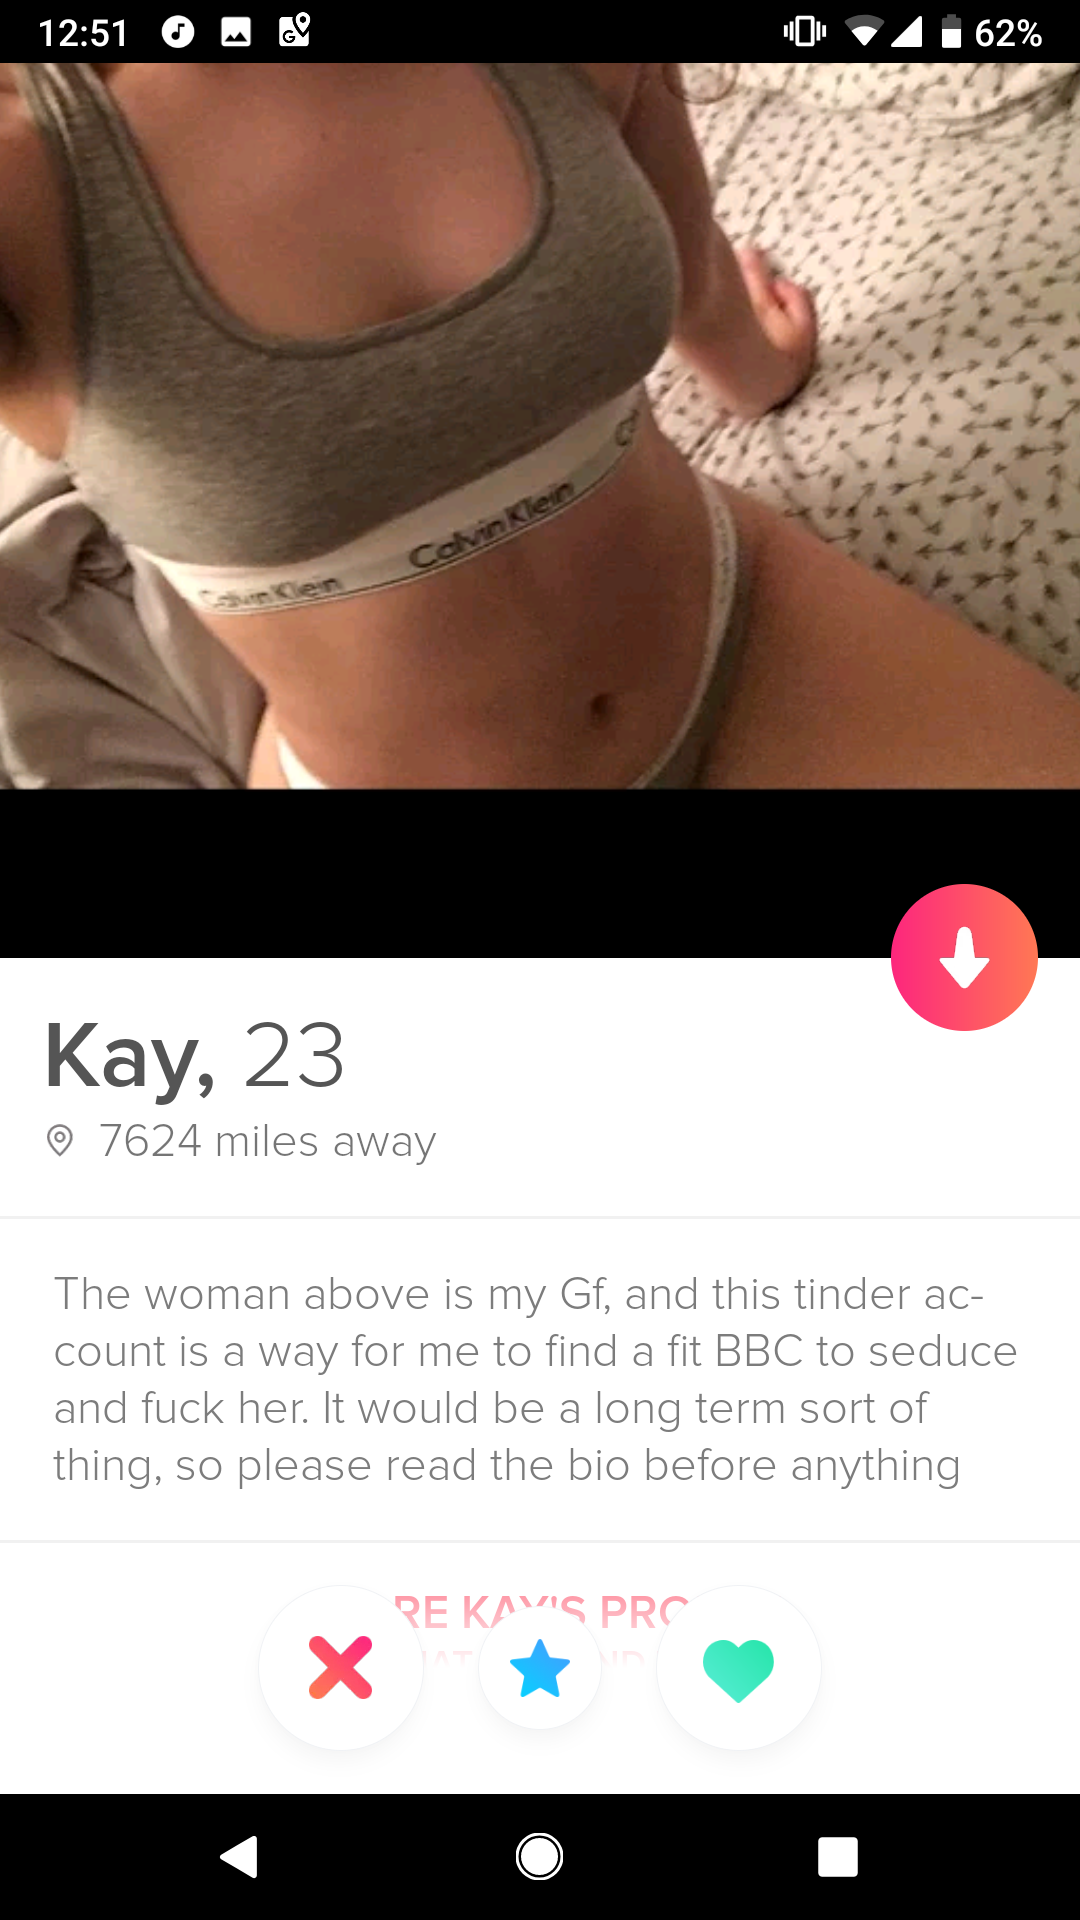 shoulder - 6 . 2 0 4 .62% Kay, 23 7624 miles away The woman above is my Gf, and this tinder ac count is a way for me to find a fit Bbc to seduce and fuck her. It would be a long term sort of thing, so please read the blo before anything Rekas Prc